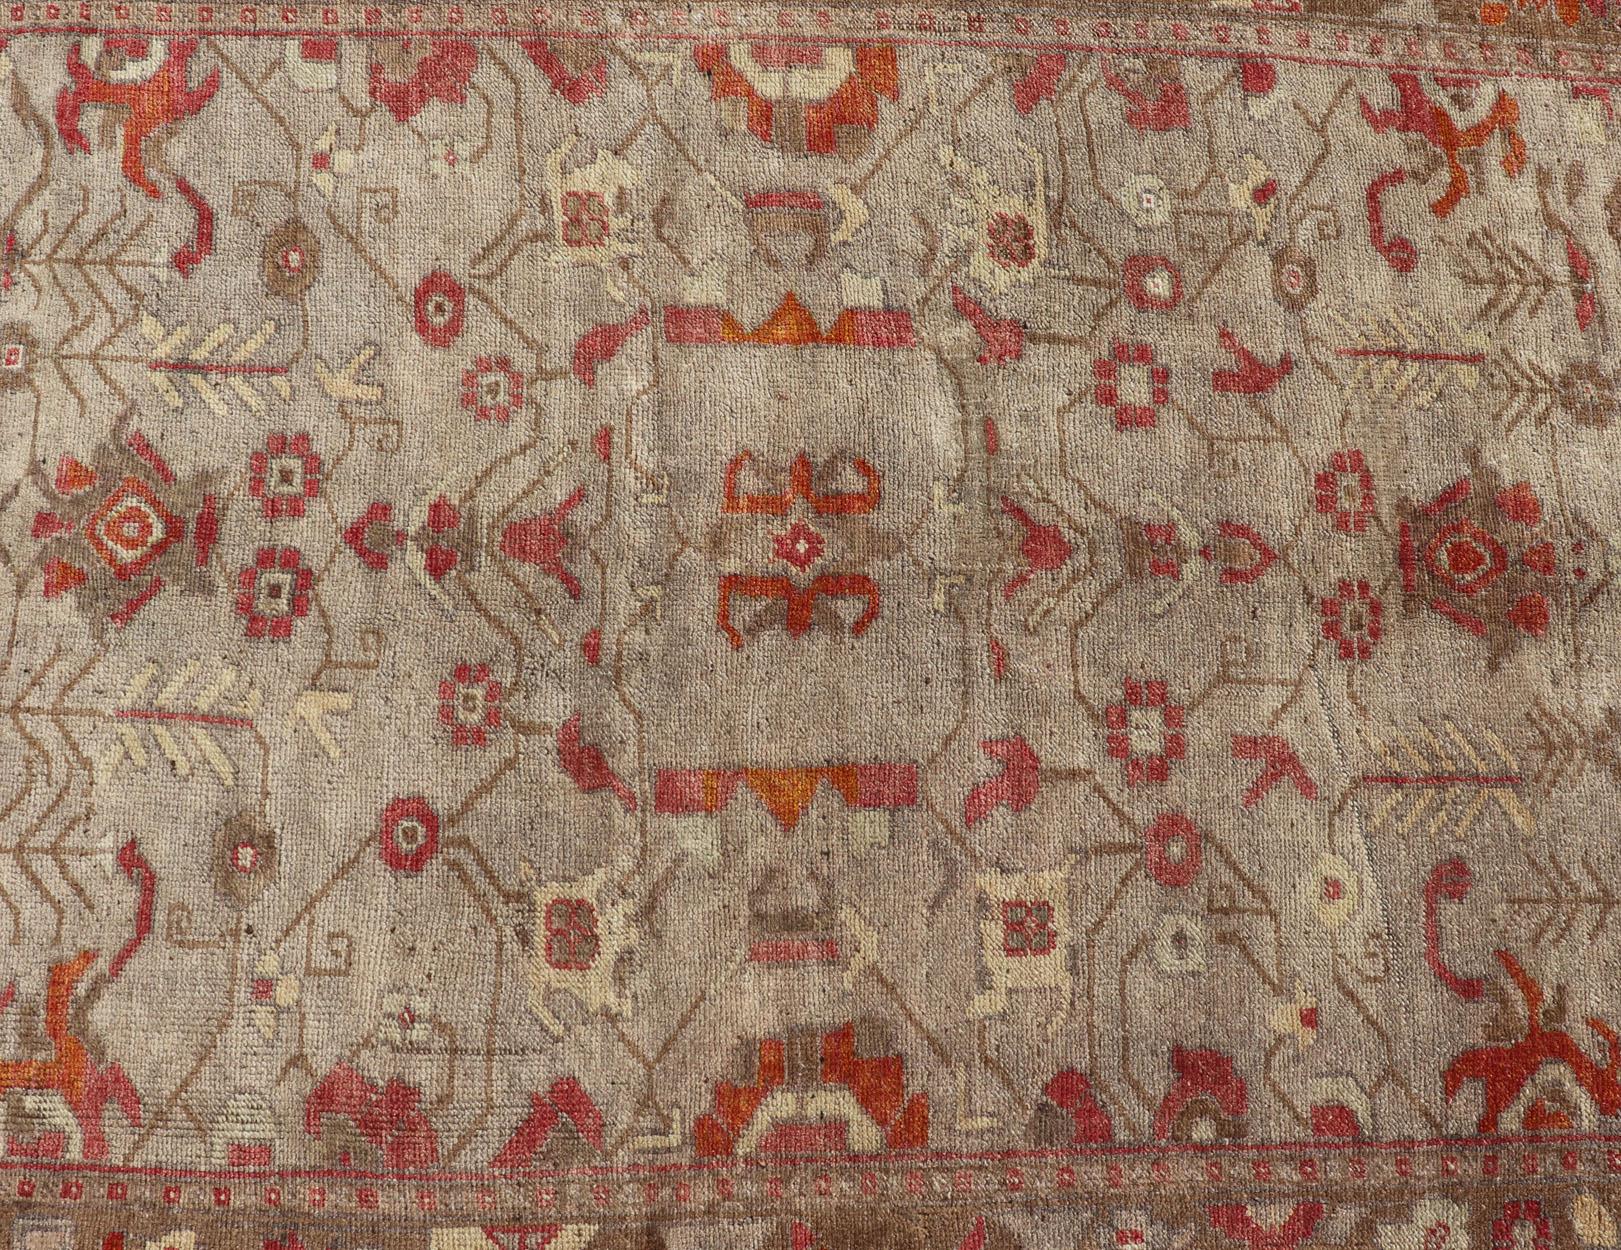 Square Size Antique Turkish Floral Oushak Rug in Green, Red Taupe & Tan For Sale 6